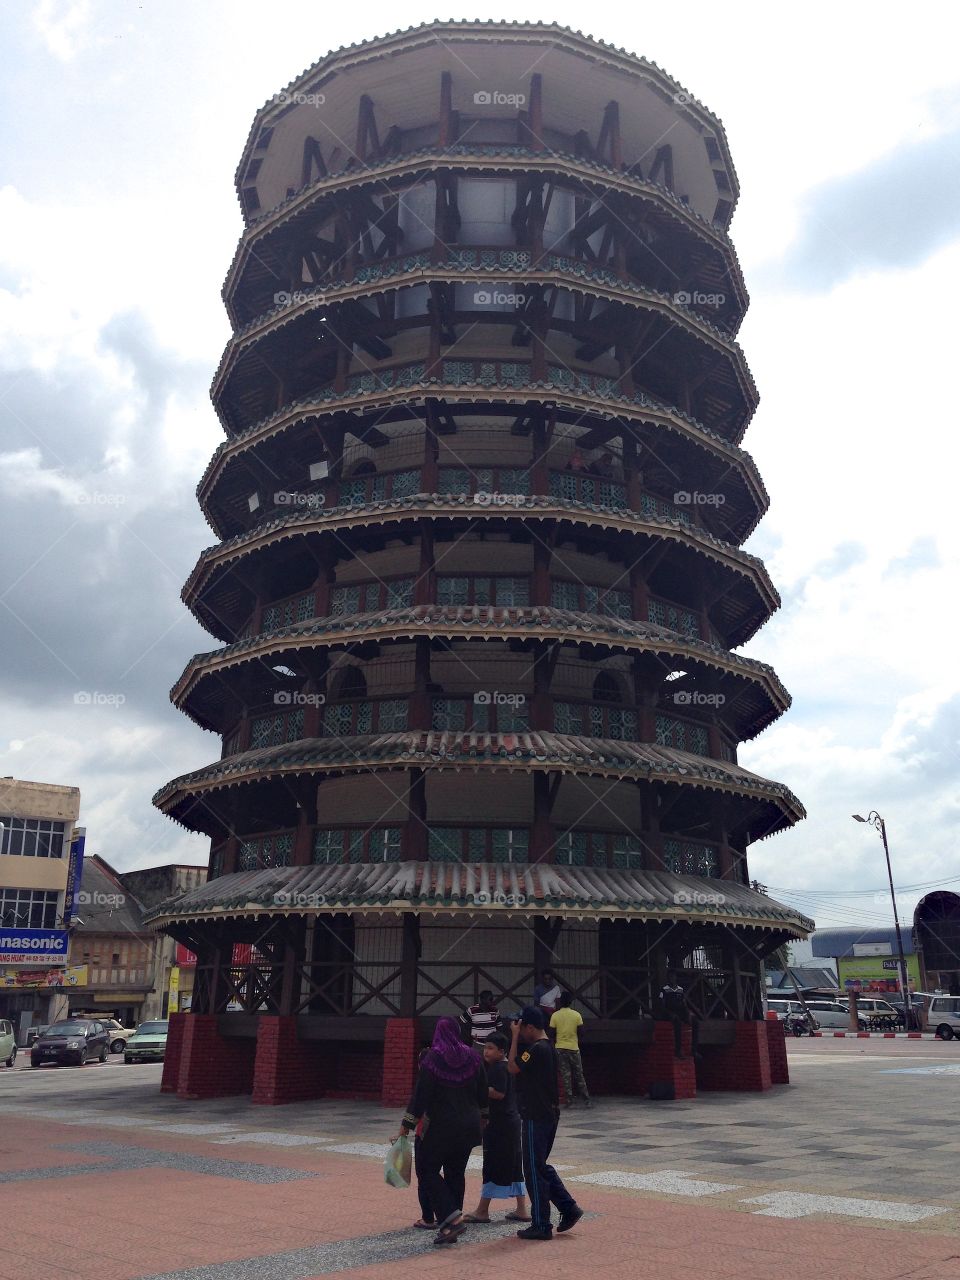 The Leaning Tower of Teluk Intan (Malay: Menara Jam Condong Teluk Intan) is a clock tower in Teluk Intan, Hilir Perak District, Perak, Malaysia. It is the Malaysian equivalent of the world-famous Leaning Tower of Pisa in Italy. The tower is slanted leftward, similar to the Tower of Pisa. It is 25.5 metres tall and, from the outside, looks like an 8 storey building, though inside it is actually divided into 3 storeys.
(Sourced wikipedia)